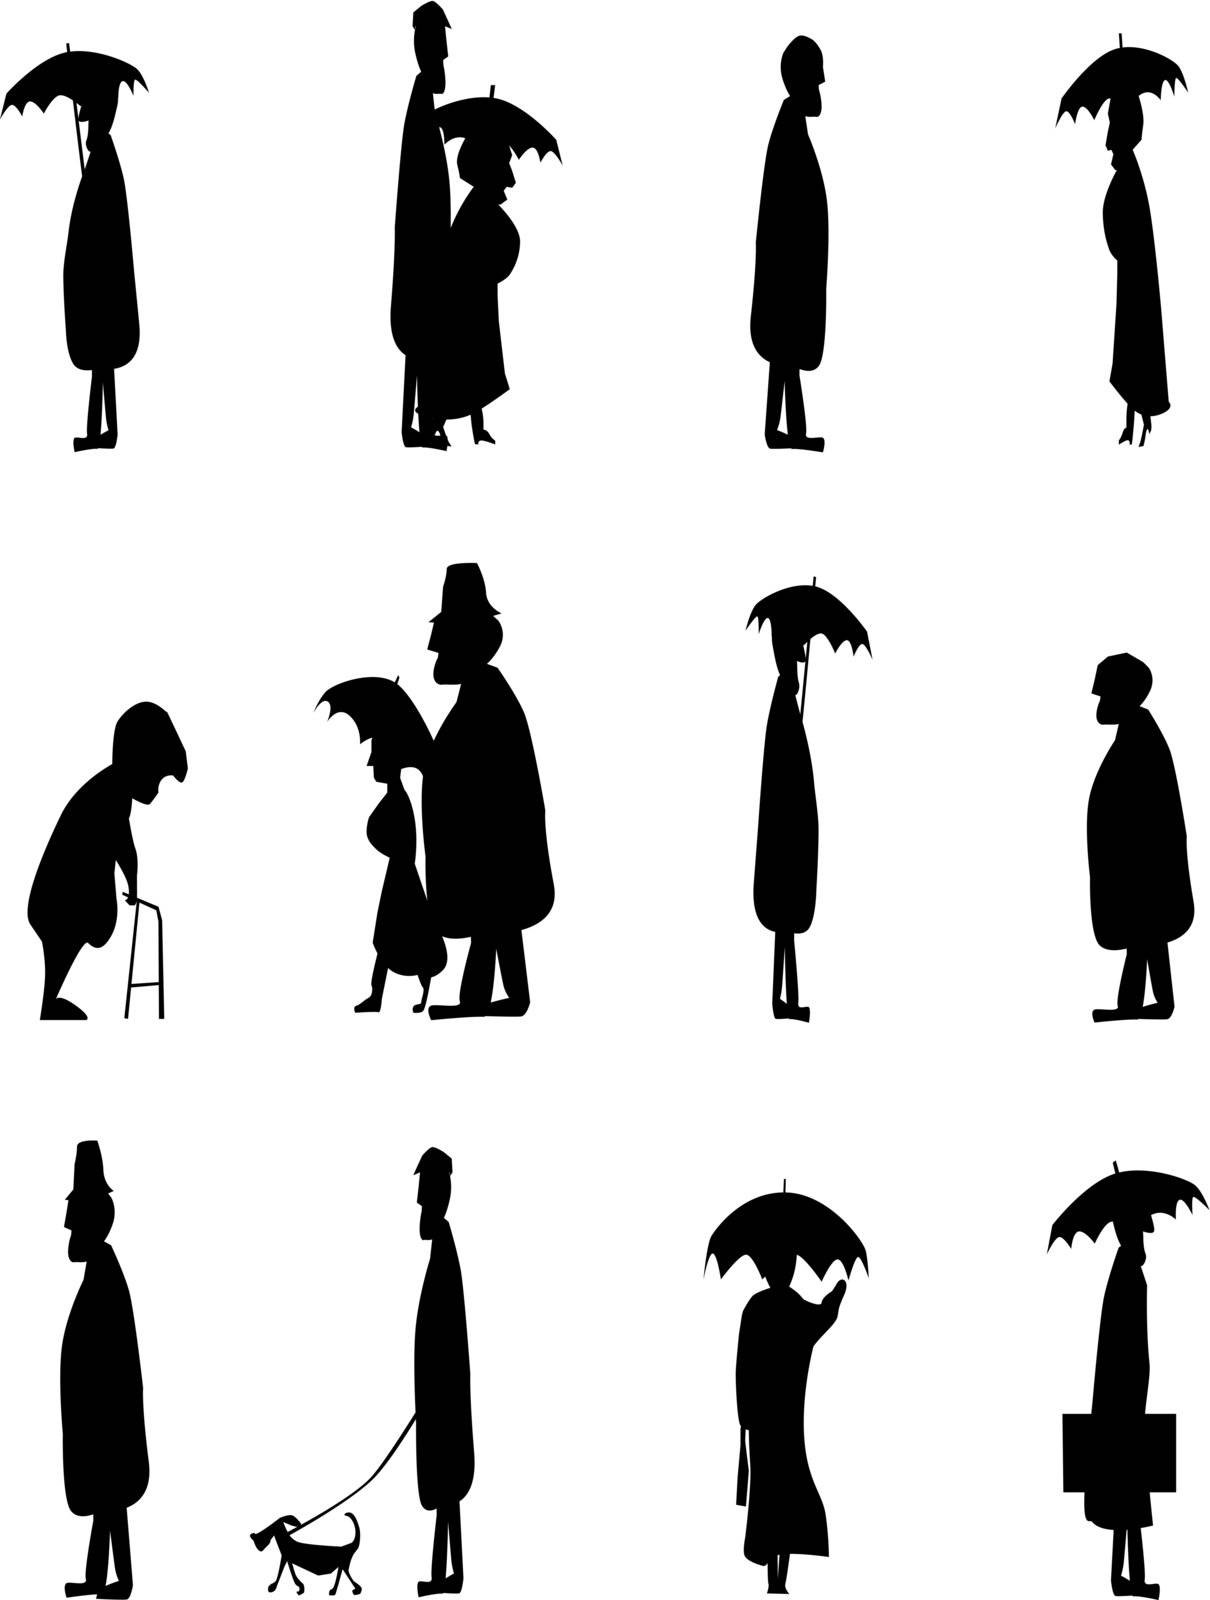 A set of silhouettes of senior citizens.